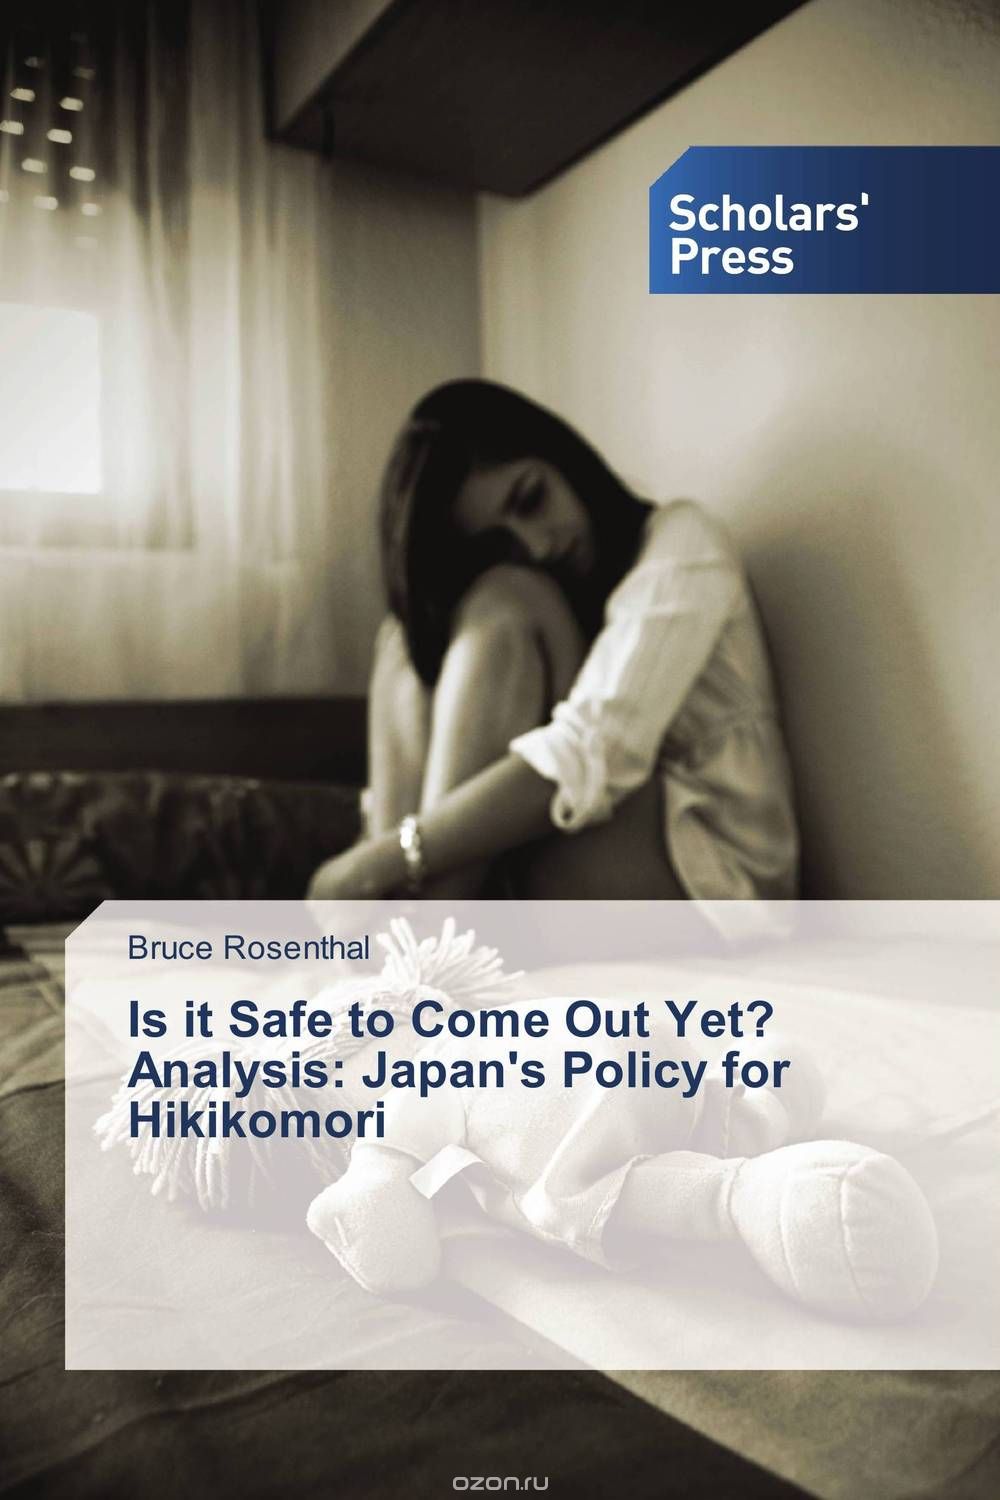 Скачать книгу "Is it Safe to Come Out Yet? Analysis: Japan's Policy for Hikikomori"